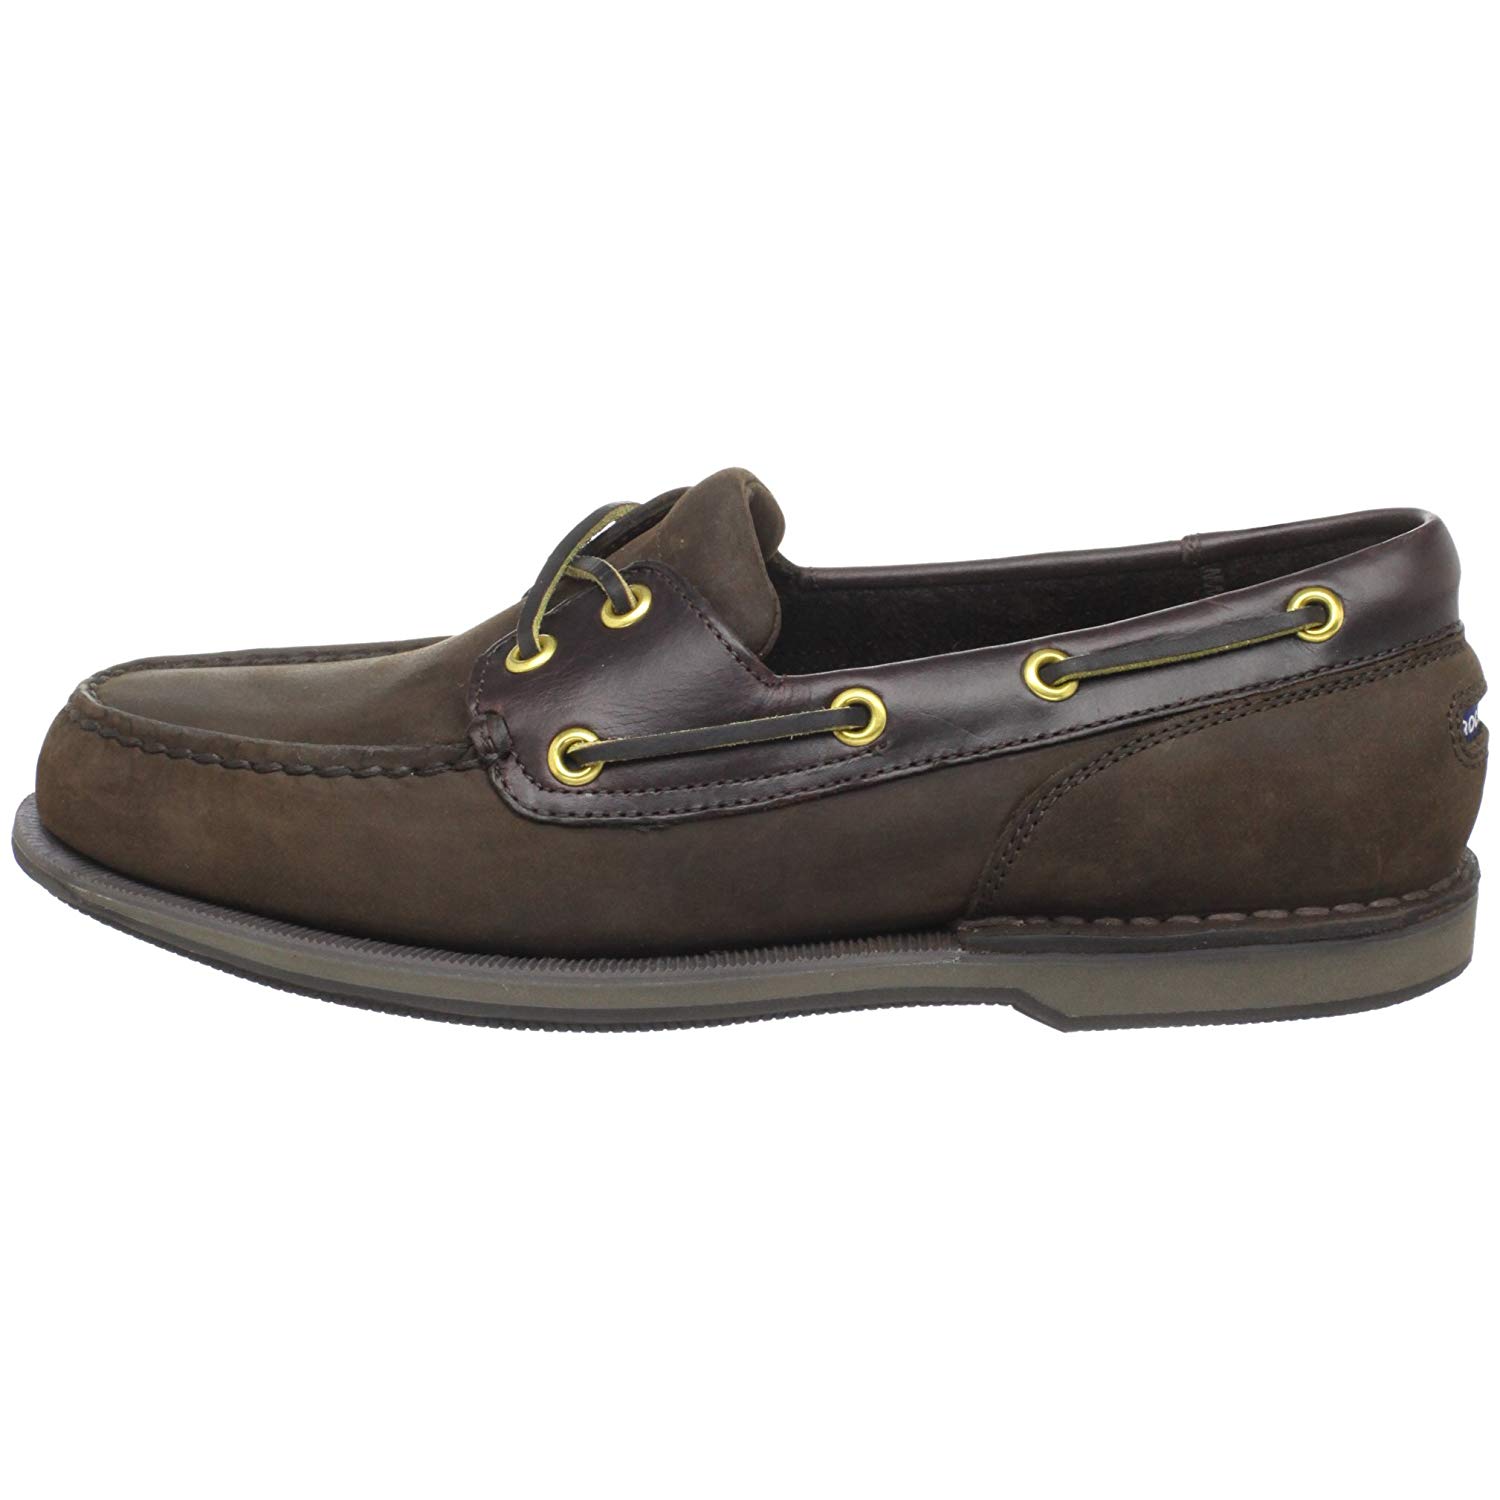 Rockport Mens Perth Closed Toe Slip On Shoes, Bark/Chocolate, Size 12.0 ...